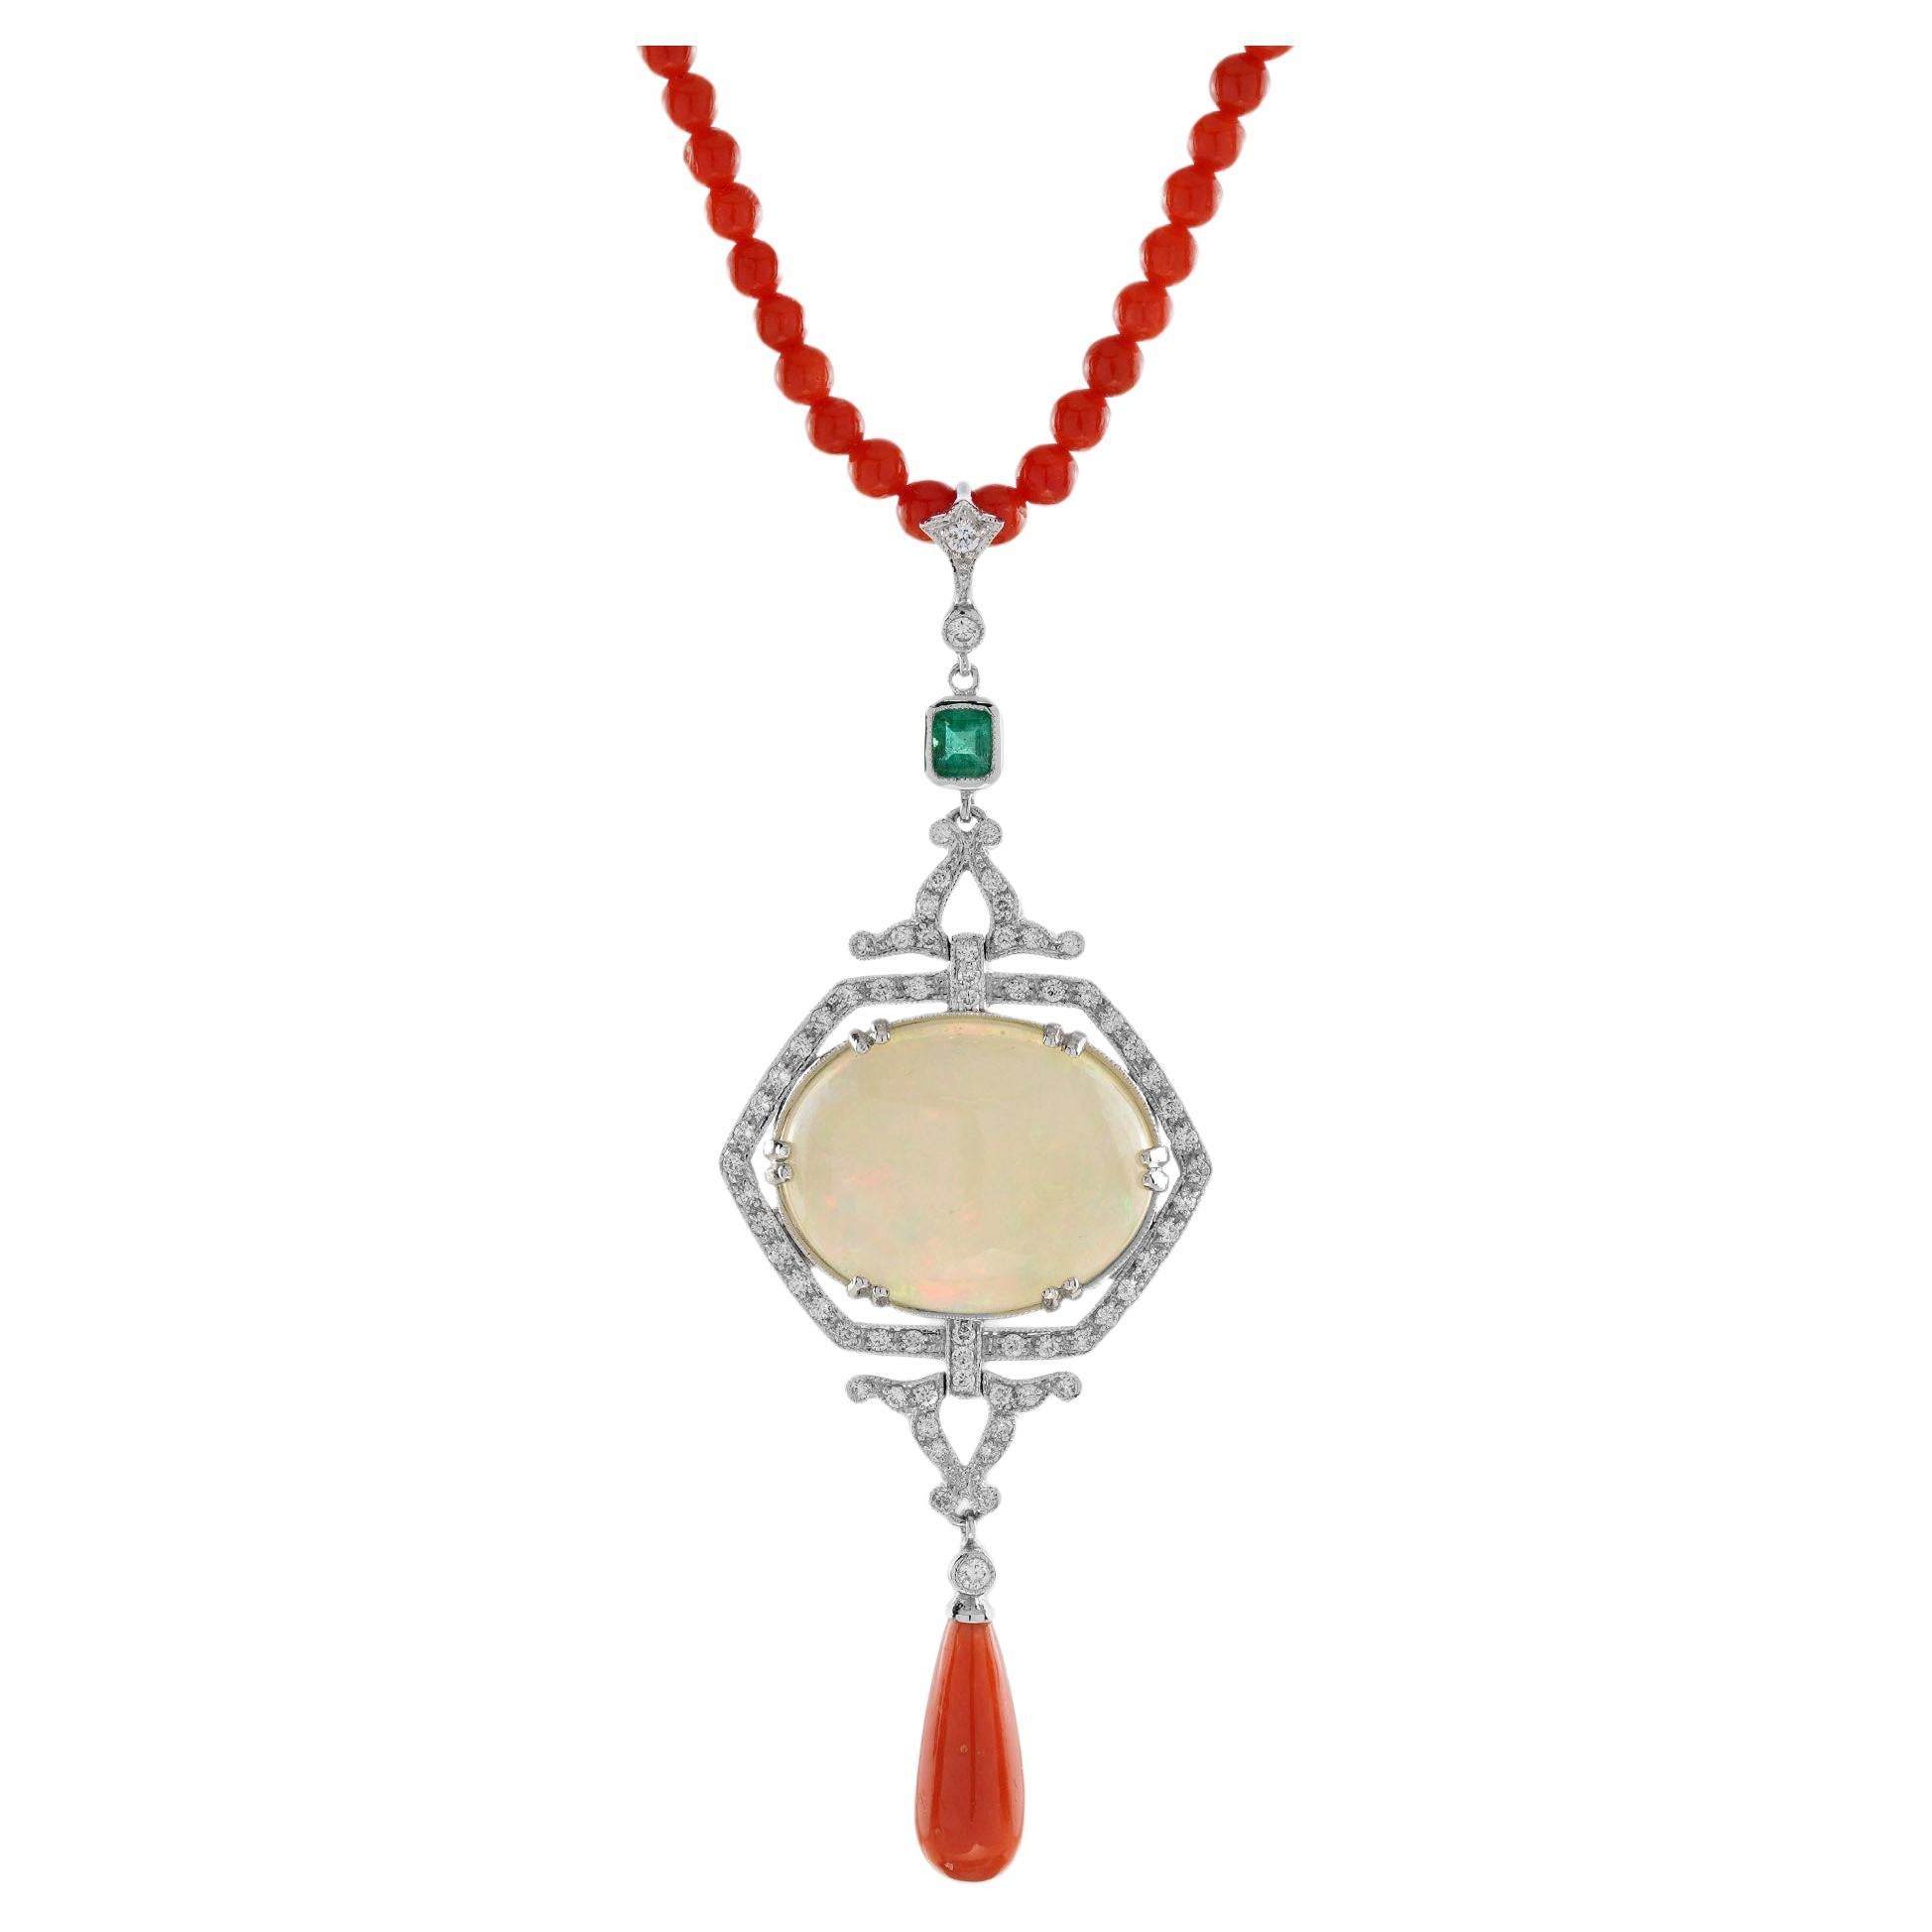 12.42 Ct. Ethiopian Opal Coral Emerald Diamond Deco Style Necklace in 14K Gold